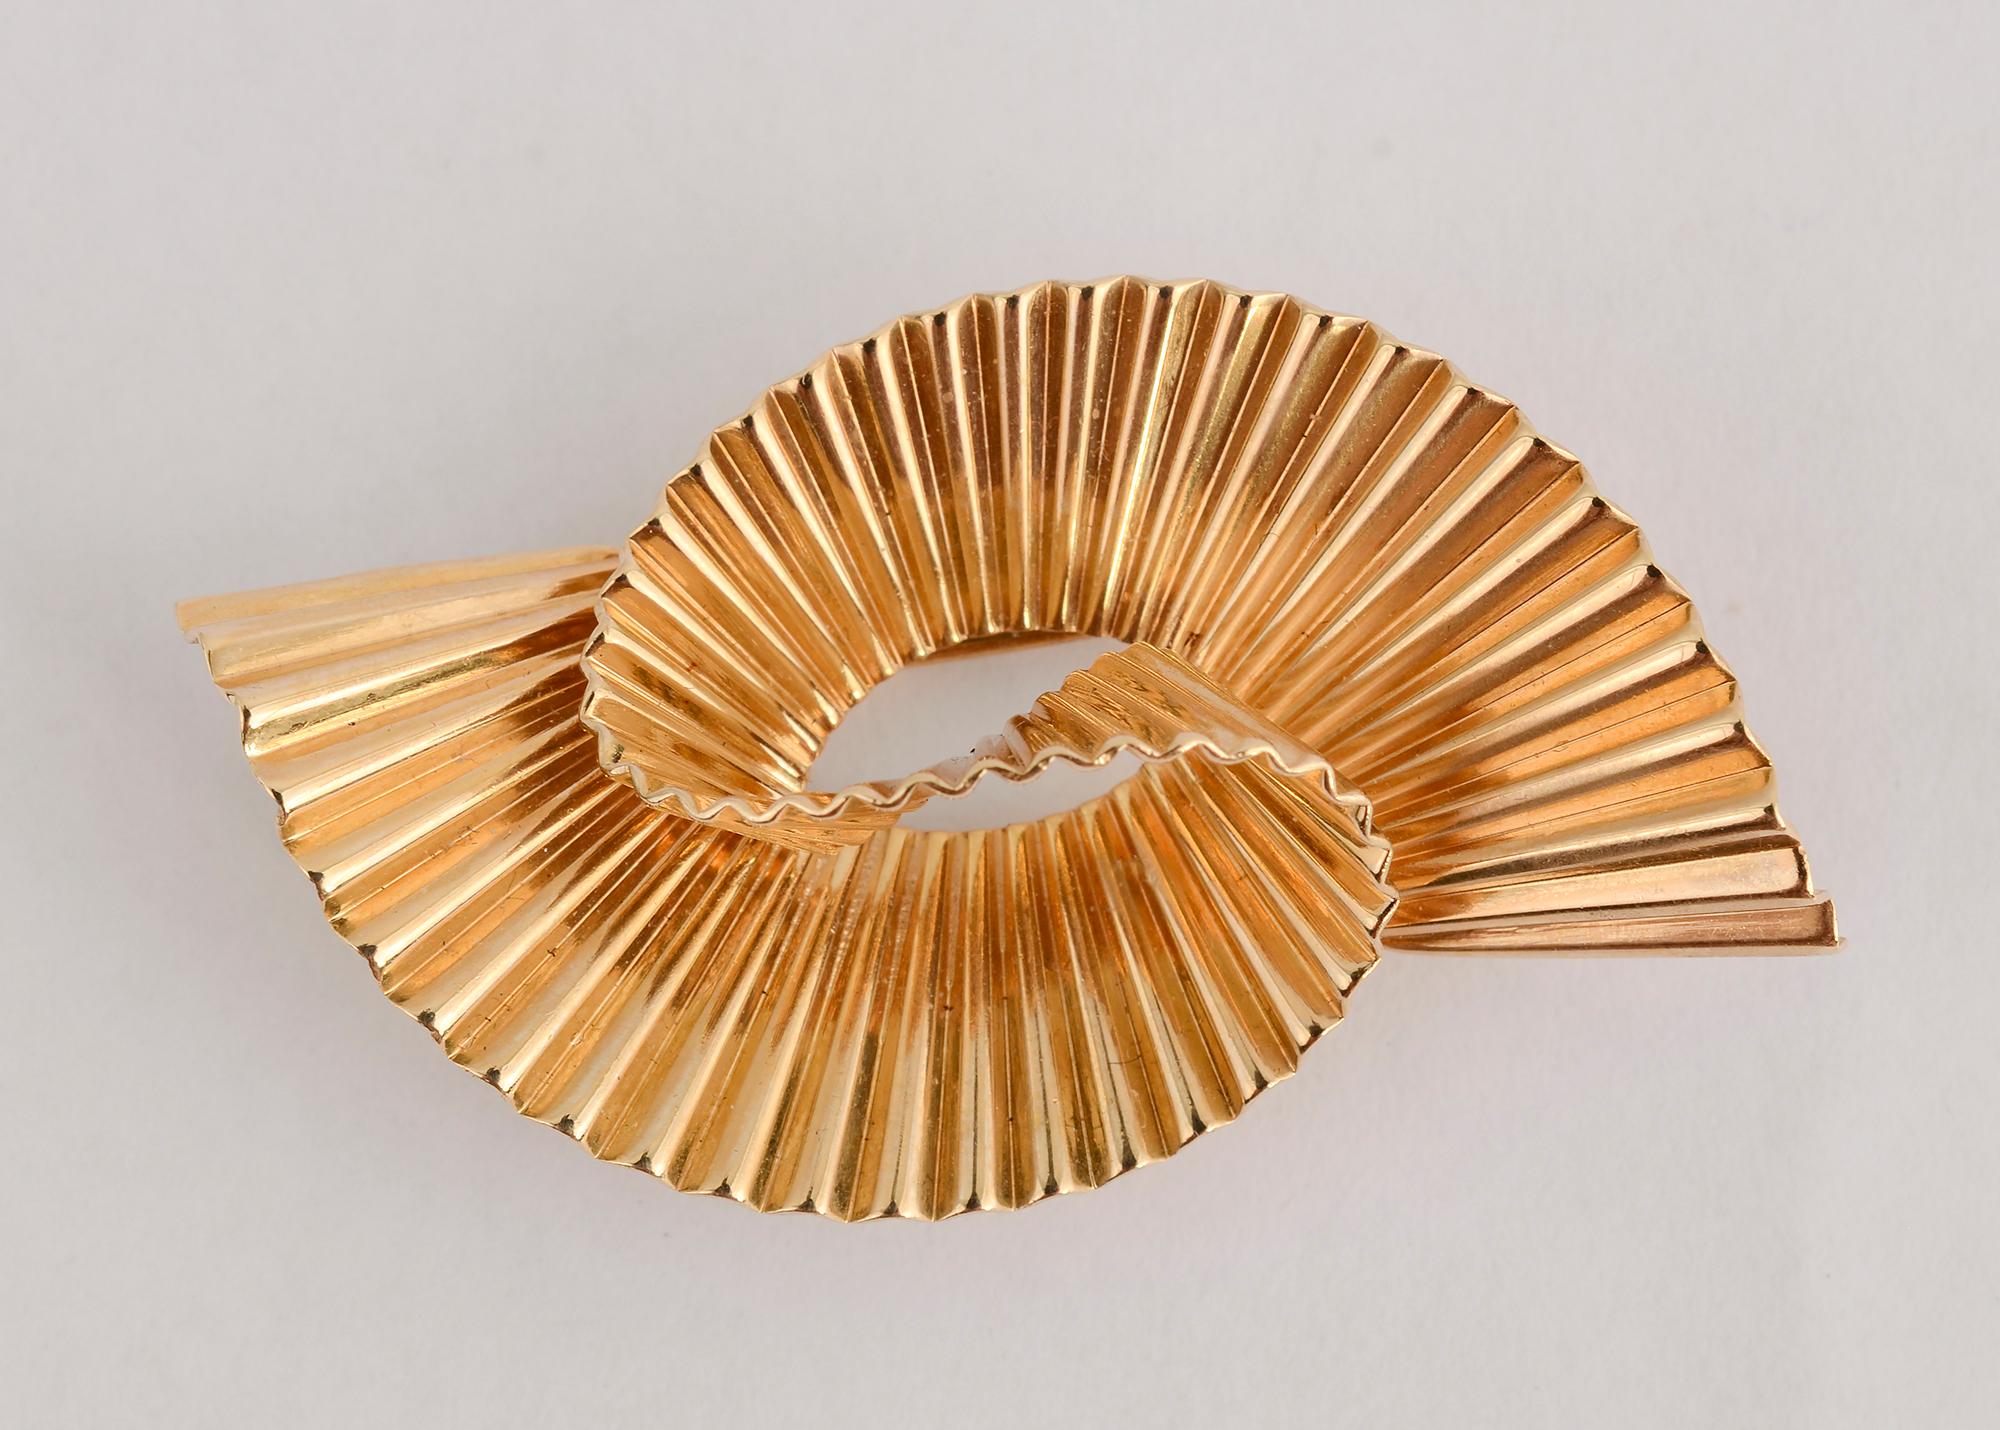 Tiffany double swirl brooch that is totally Retro in every way. The three dimensional swirl design made of 14 karat ribbed gold is emblematic of the era. The fluted gold adds great reflectivity to the piece.
It has double pin stems. The brooch can